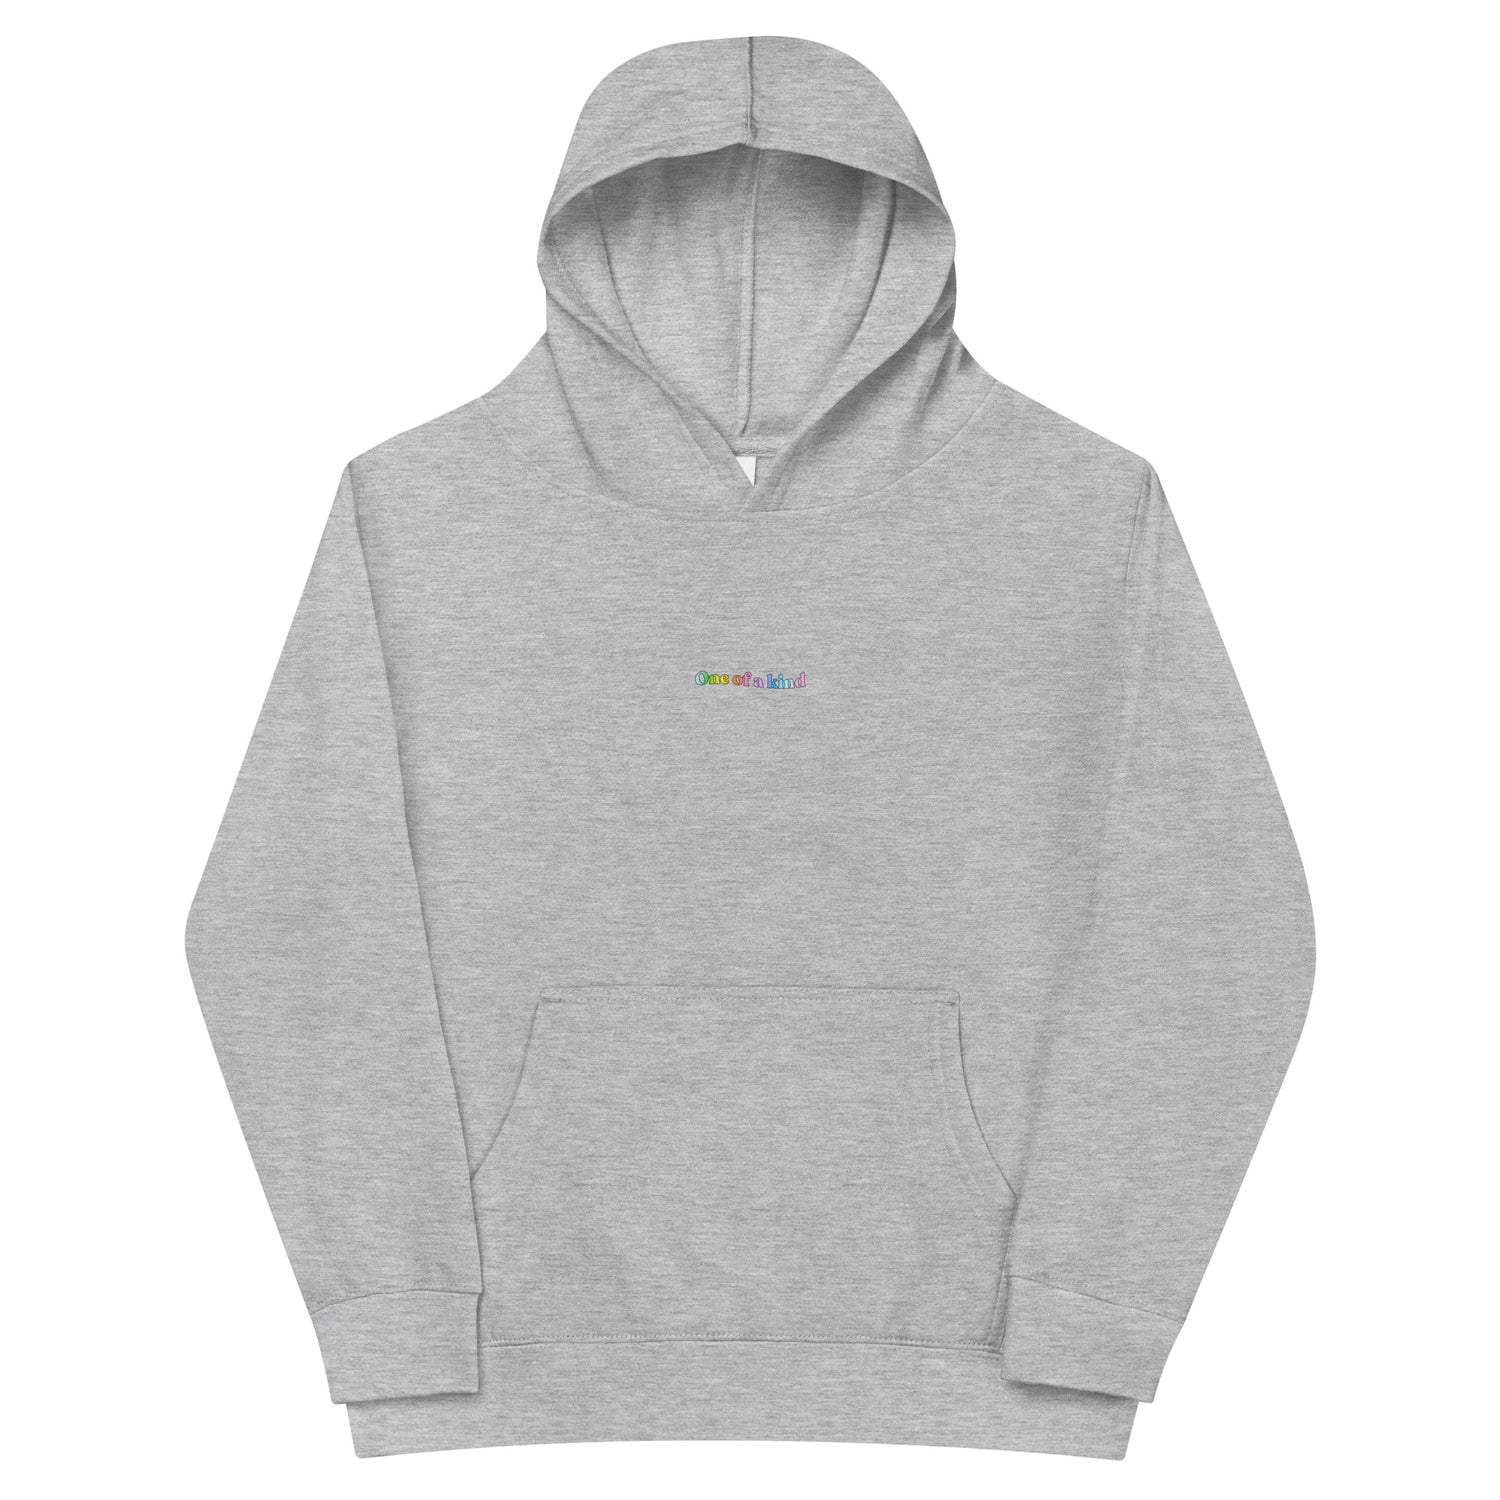 Grey Kidswear hoodie featuring "One of a kind" design with pockets at front.